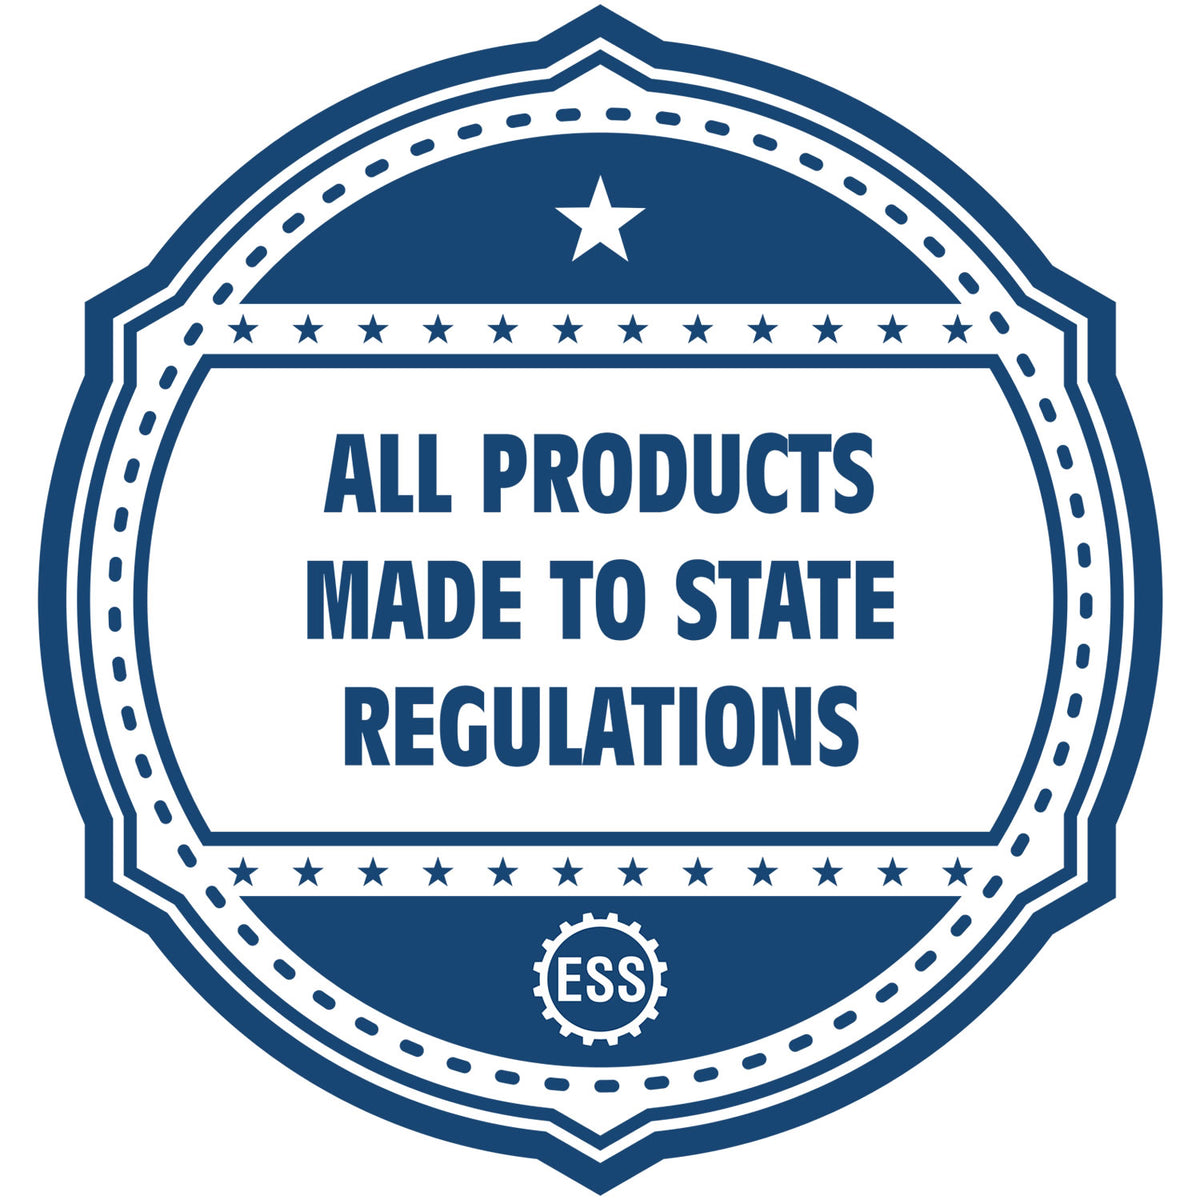 An icon or badge element for the Slim Pre-Inked Washington Landscape Architect Seal Stamp showing that this product is made in compliance with state regulations.